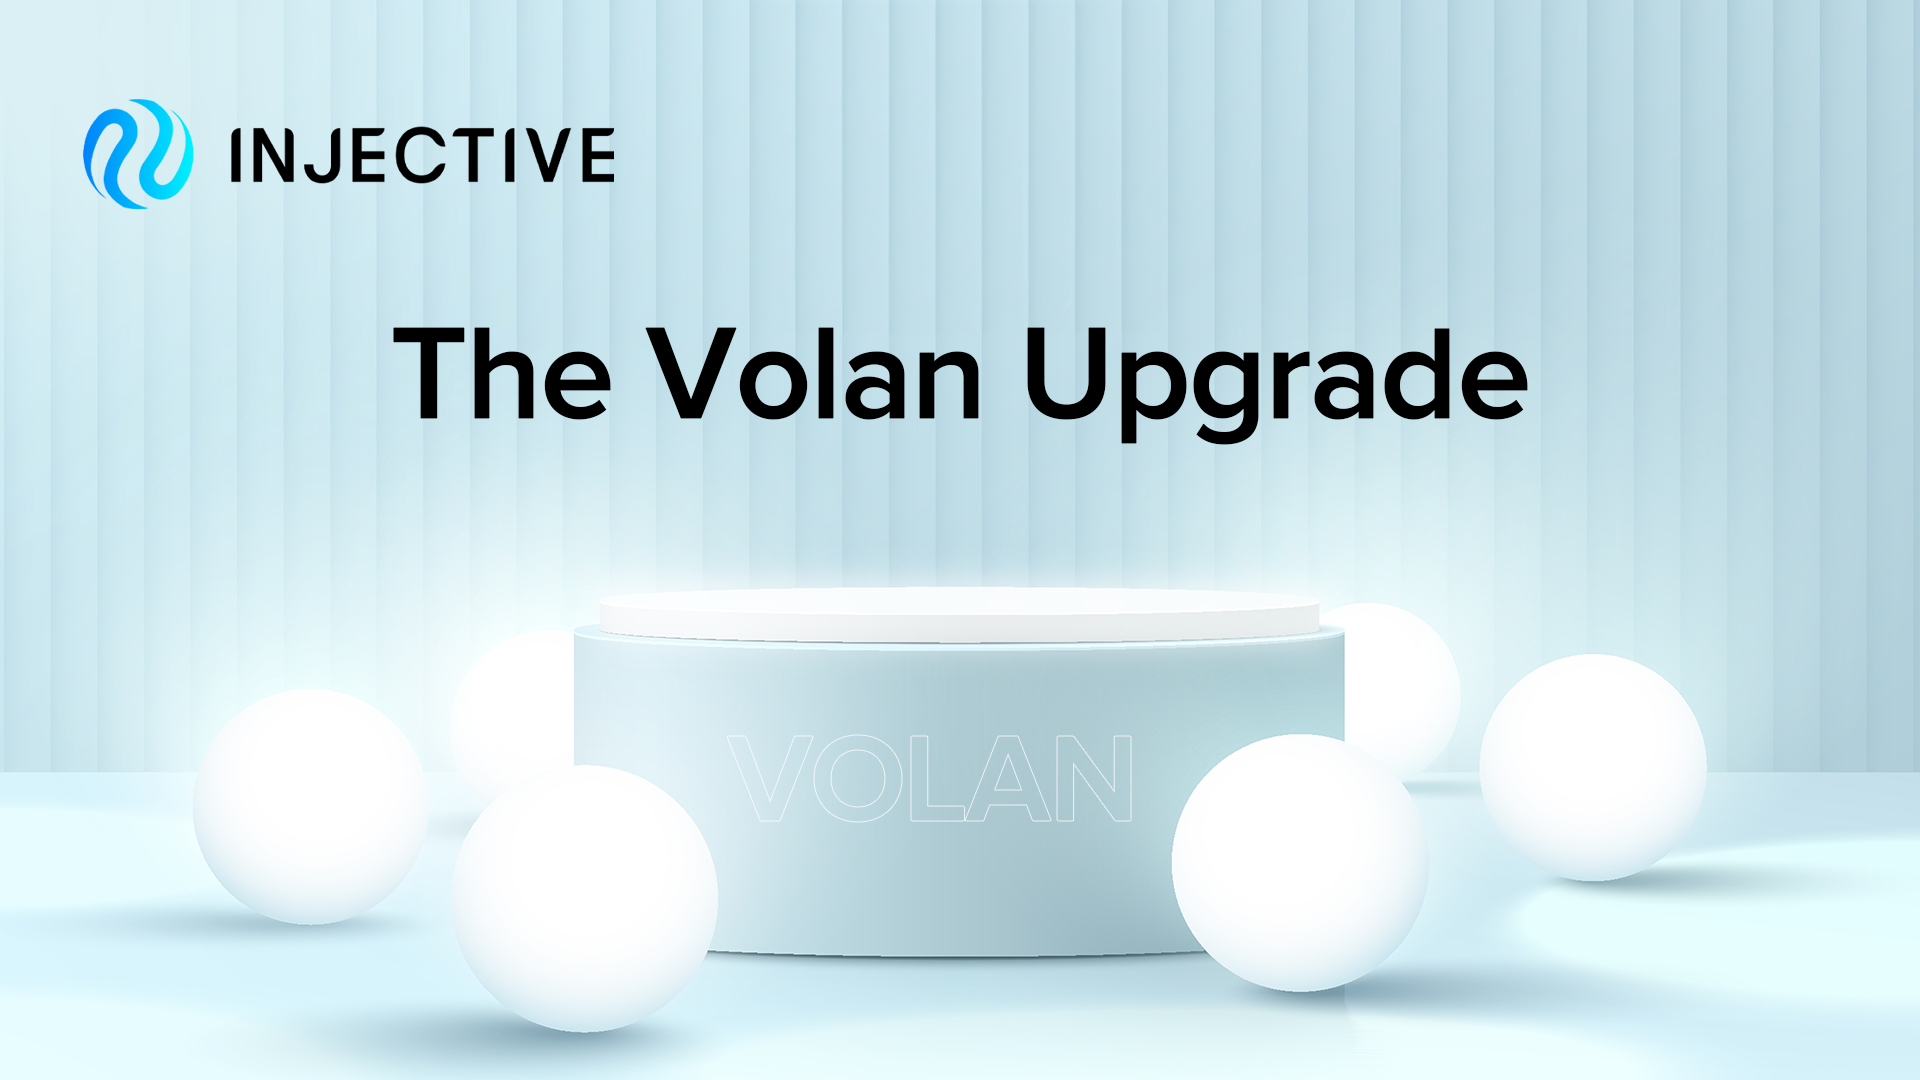 A New Era of Injective: The Volan Mainnet Upgrade